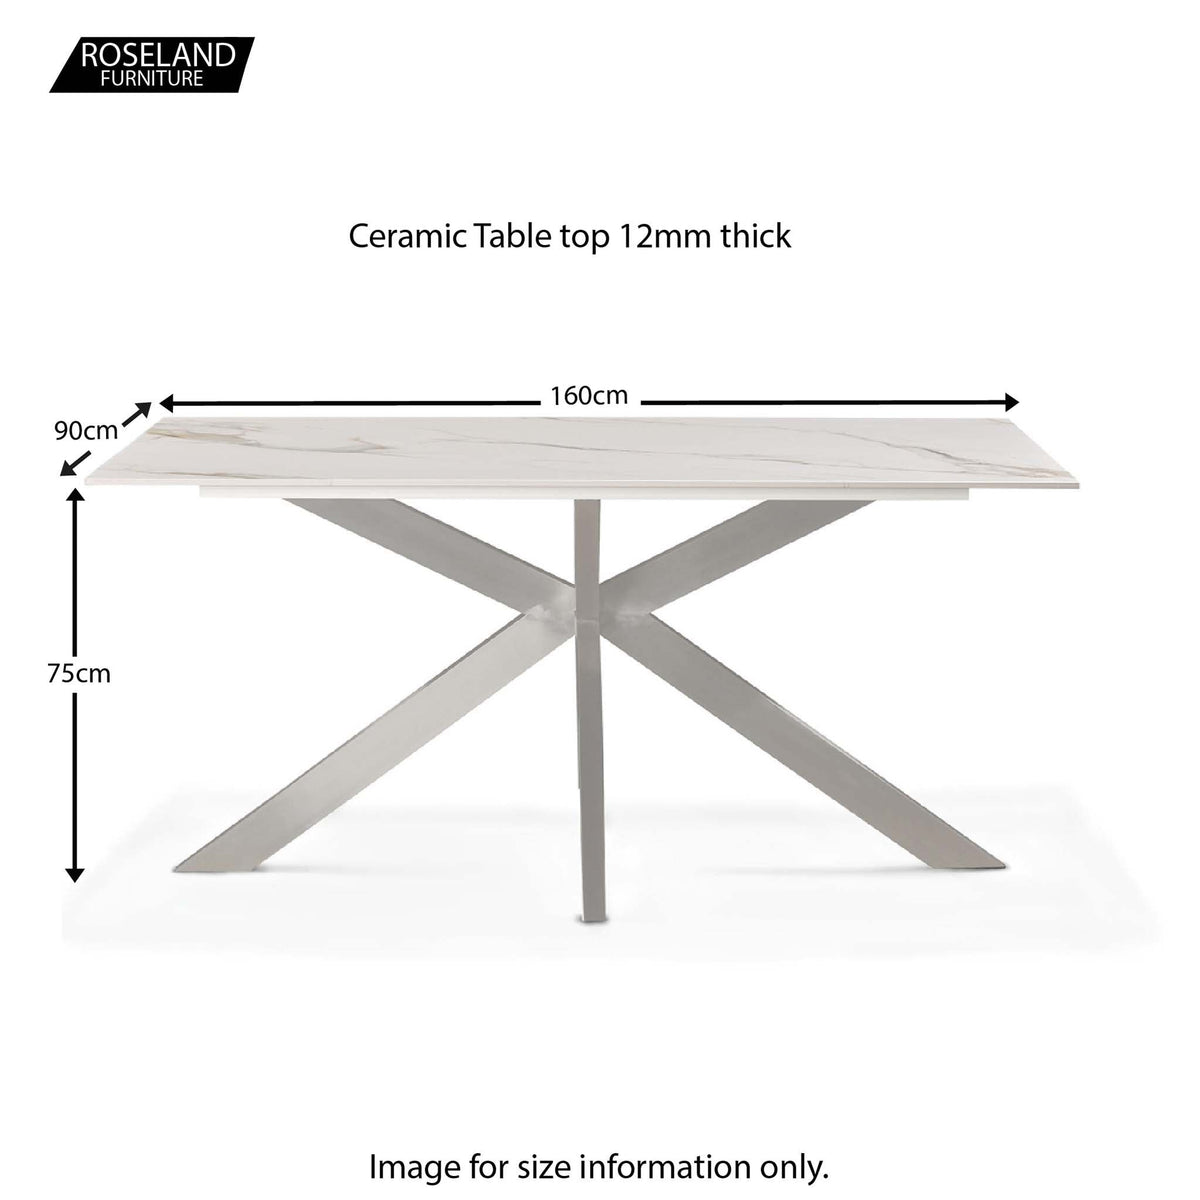 Sienna 160cm Ceramic Dining Table - size guide